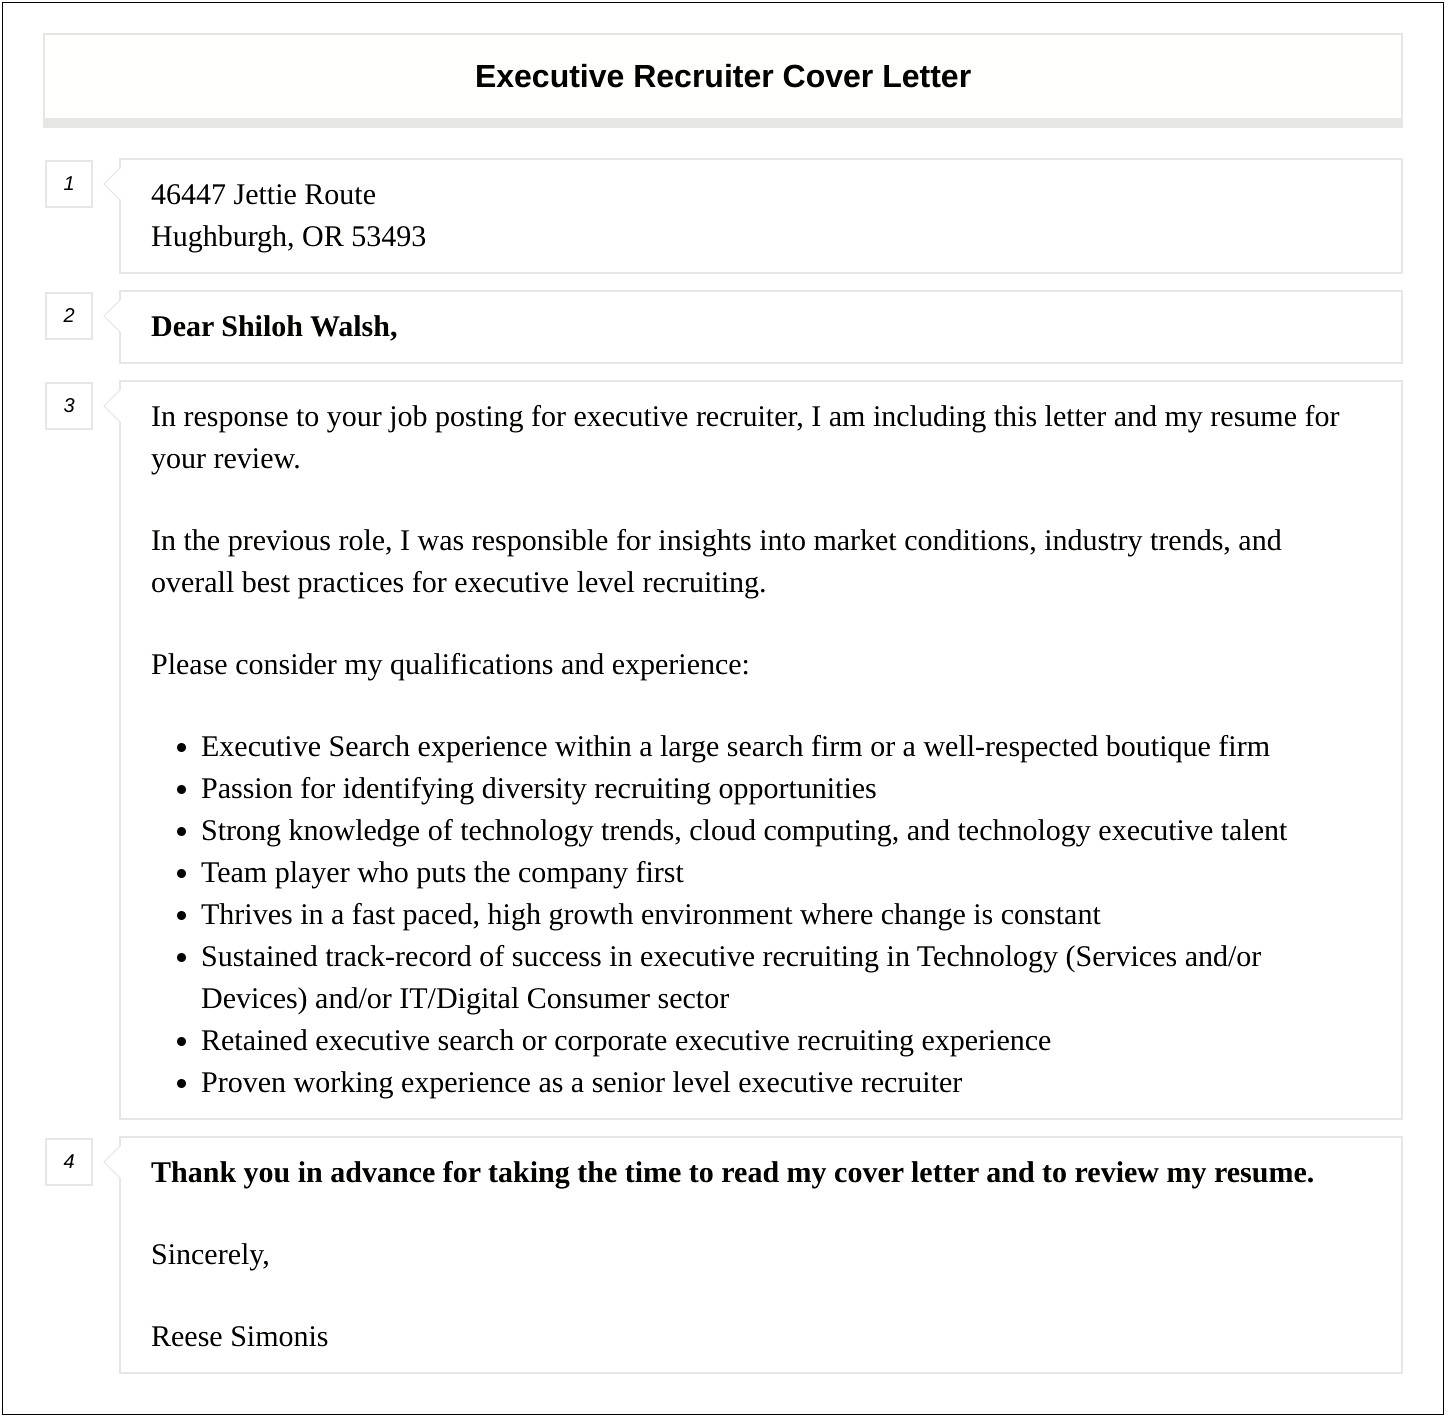 Cover Letter For Resume To Executive Recruiter